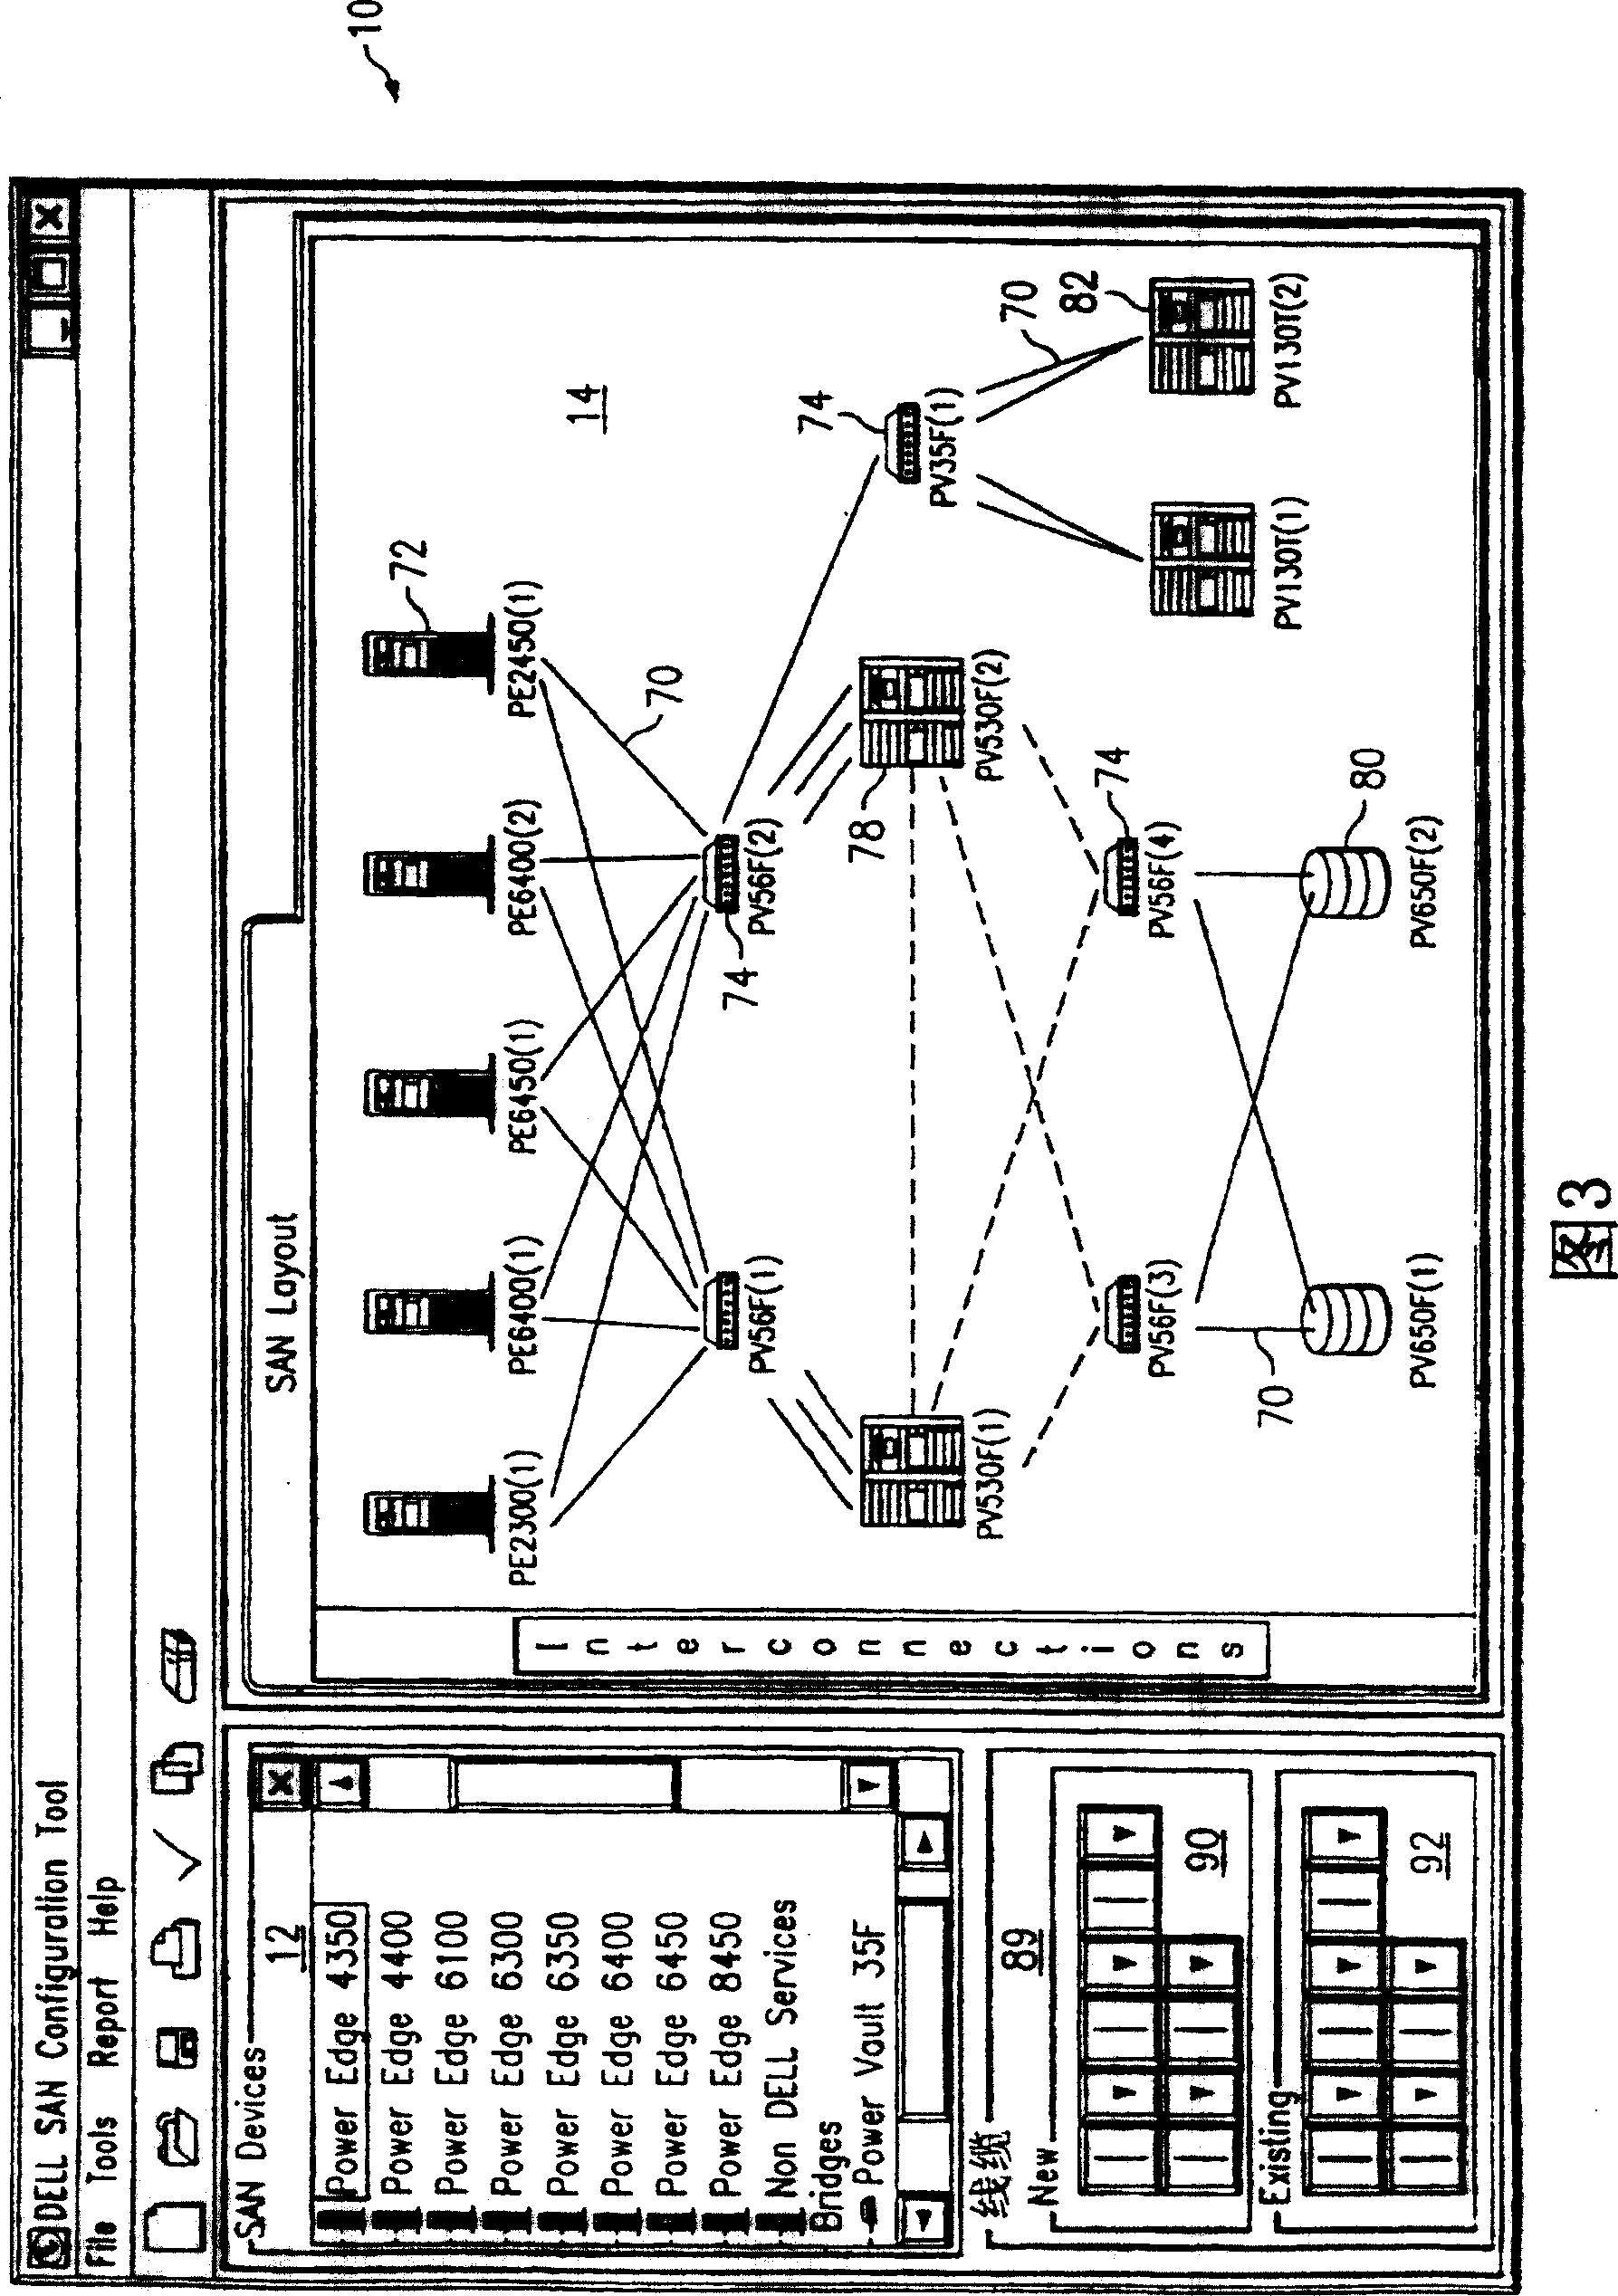 System and method for installing storage area network